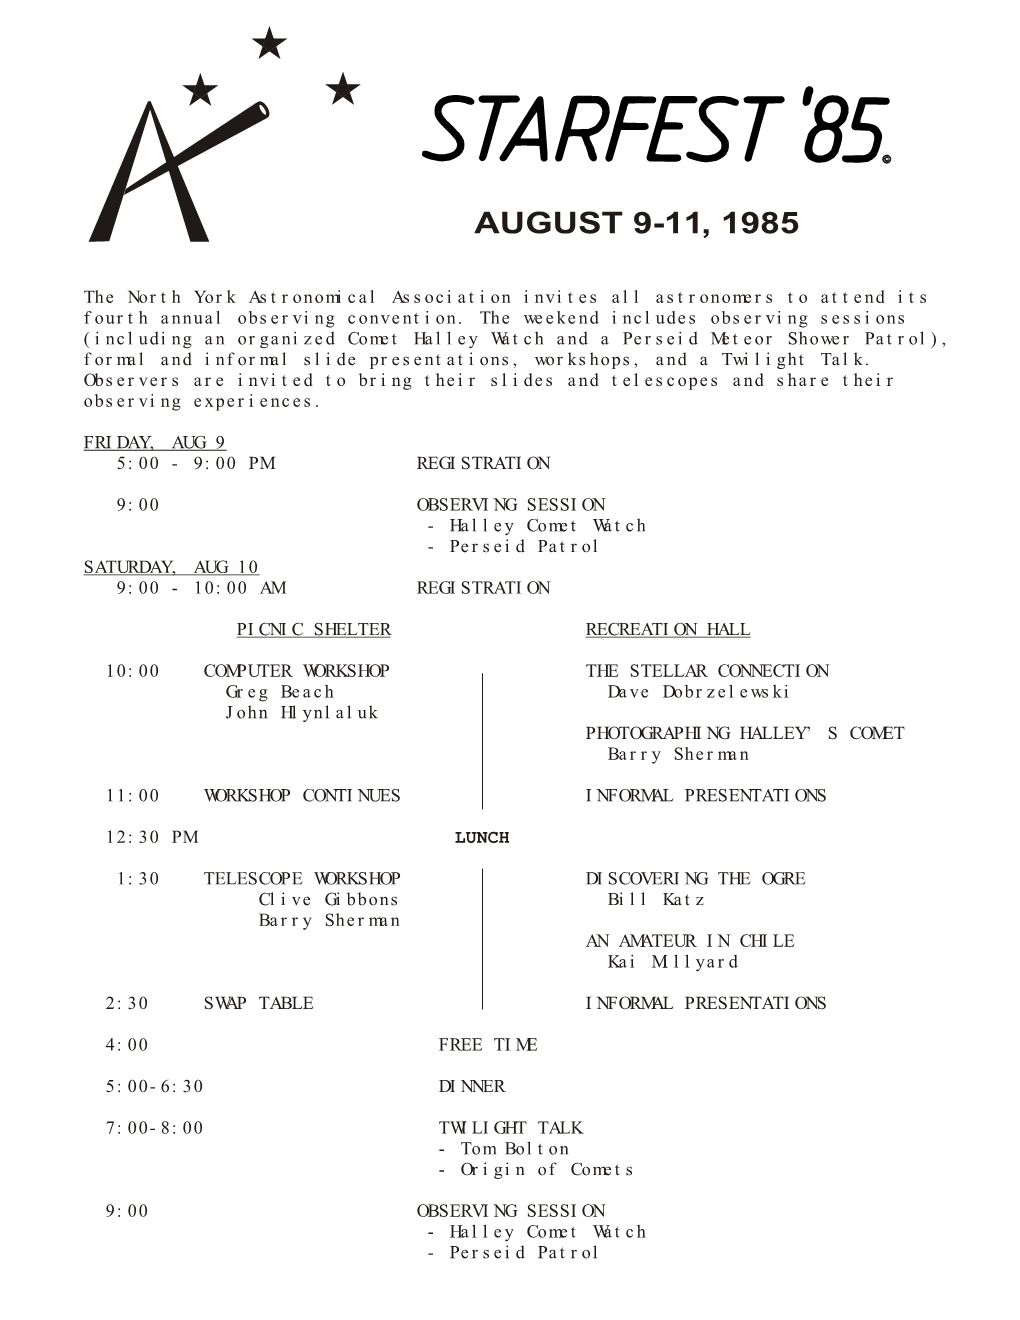 August 9-11, 1985